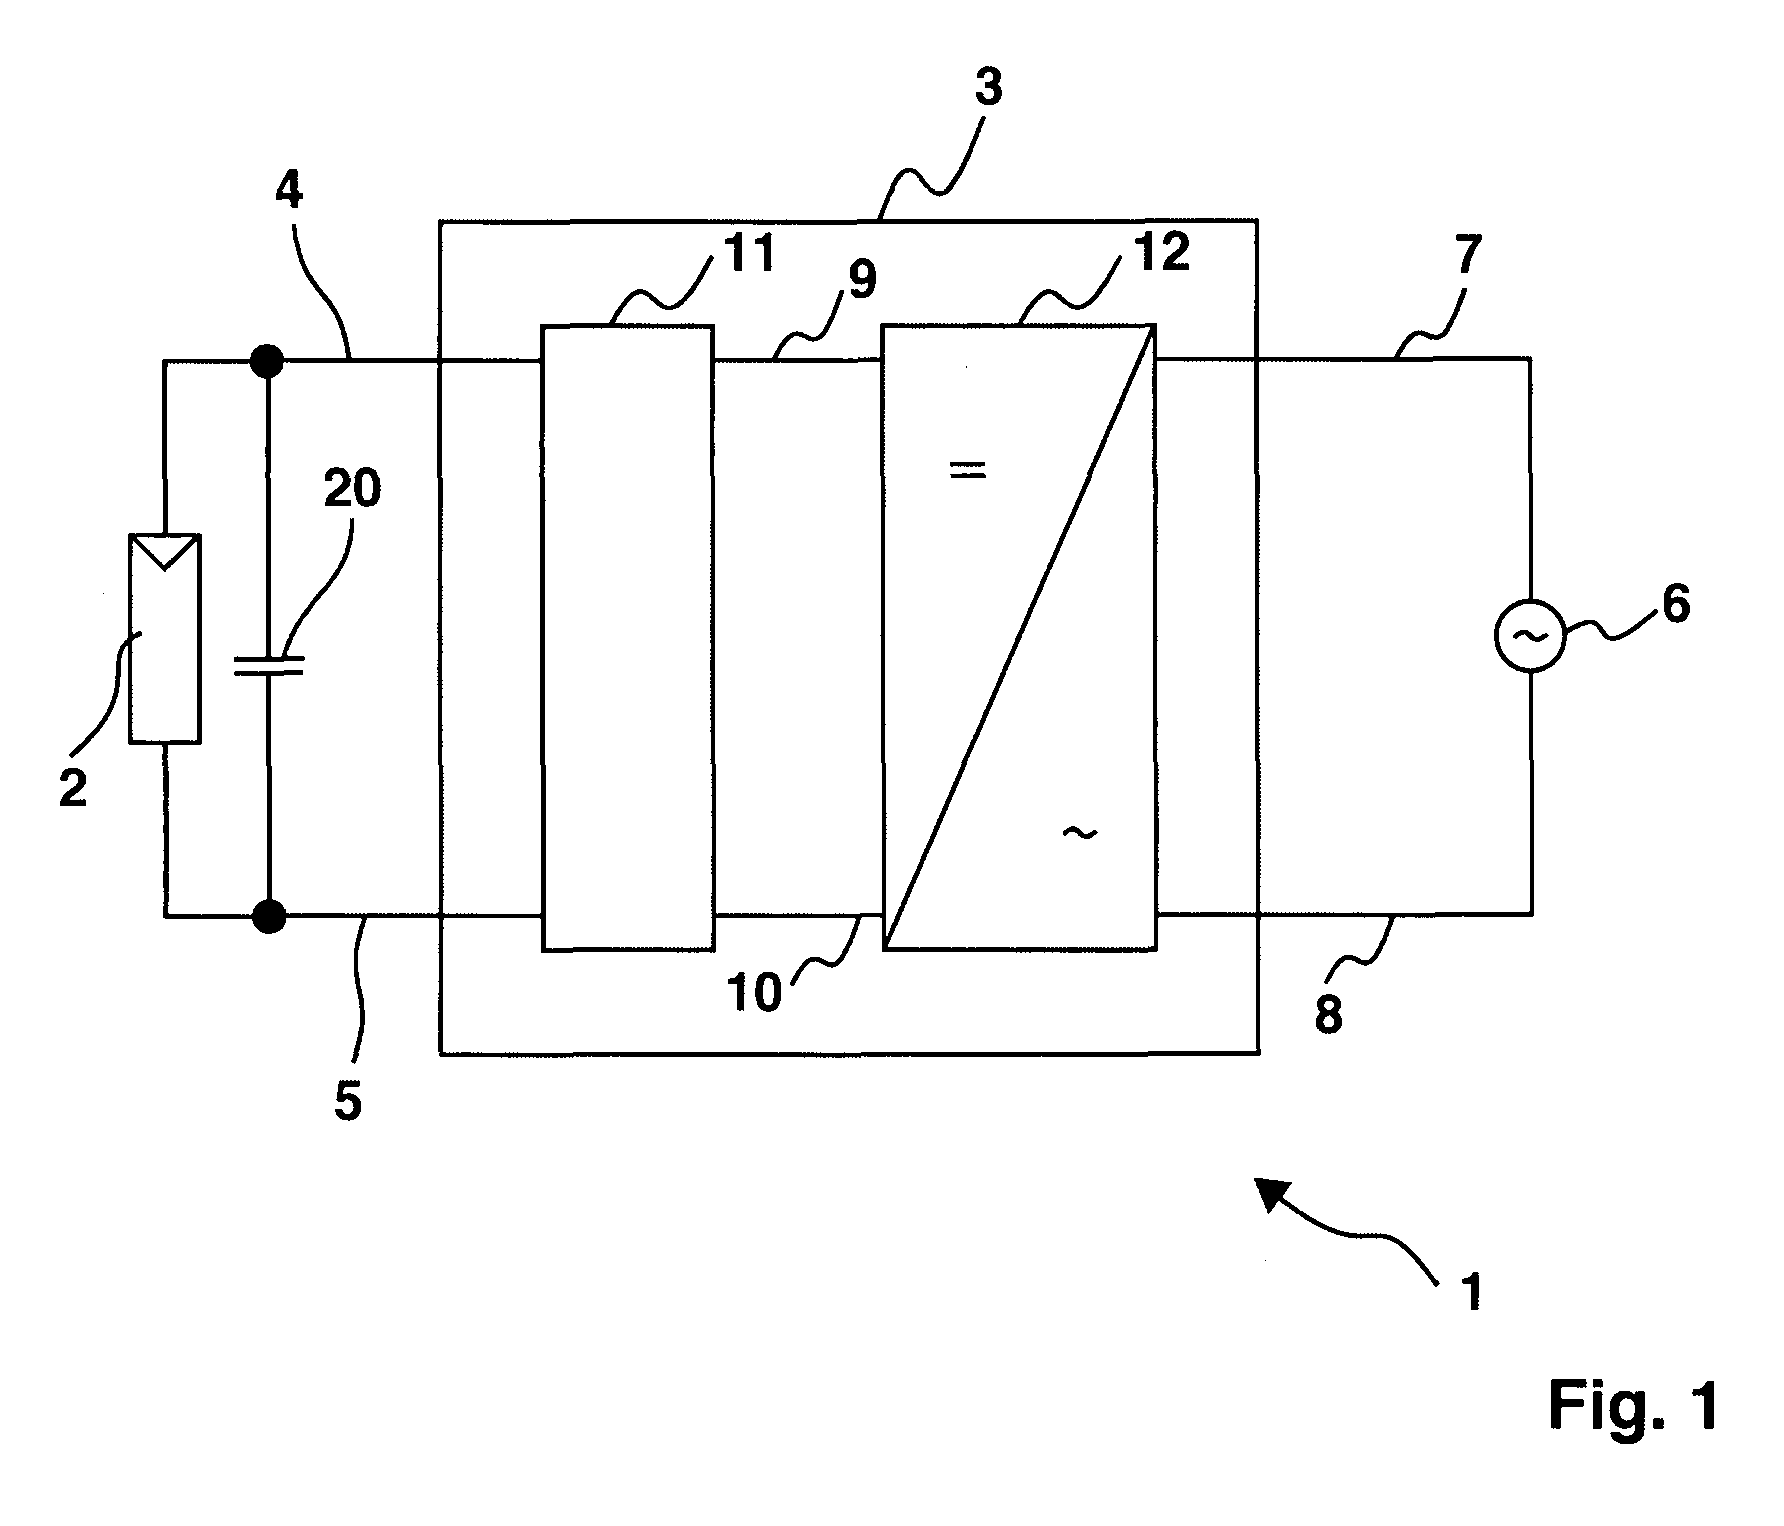 Switching device and method, in particular for photovoltaic generators